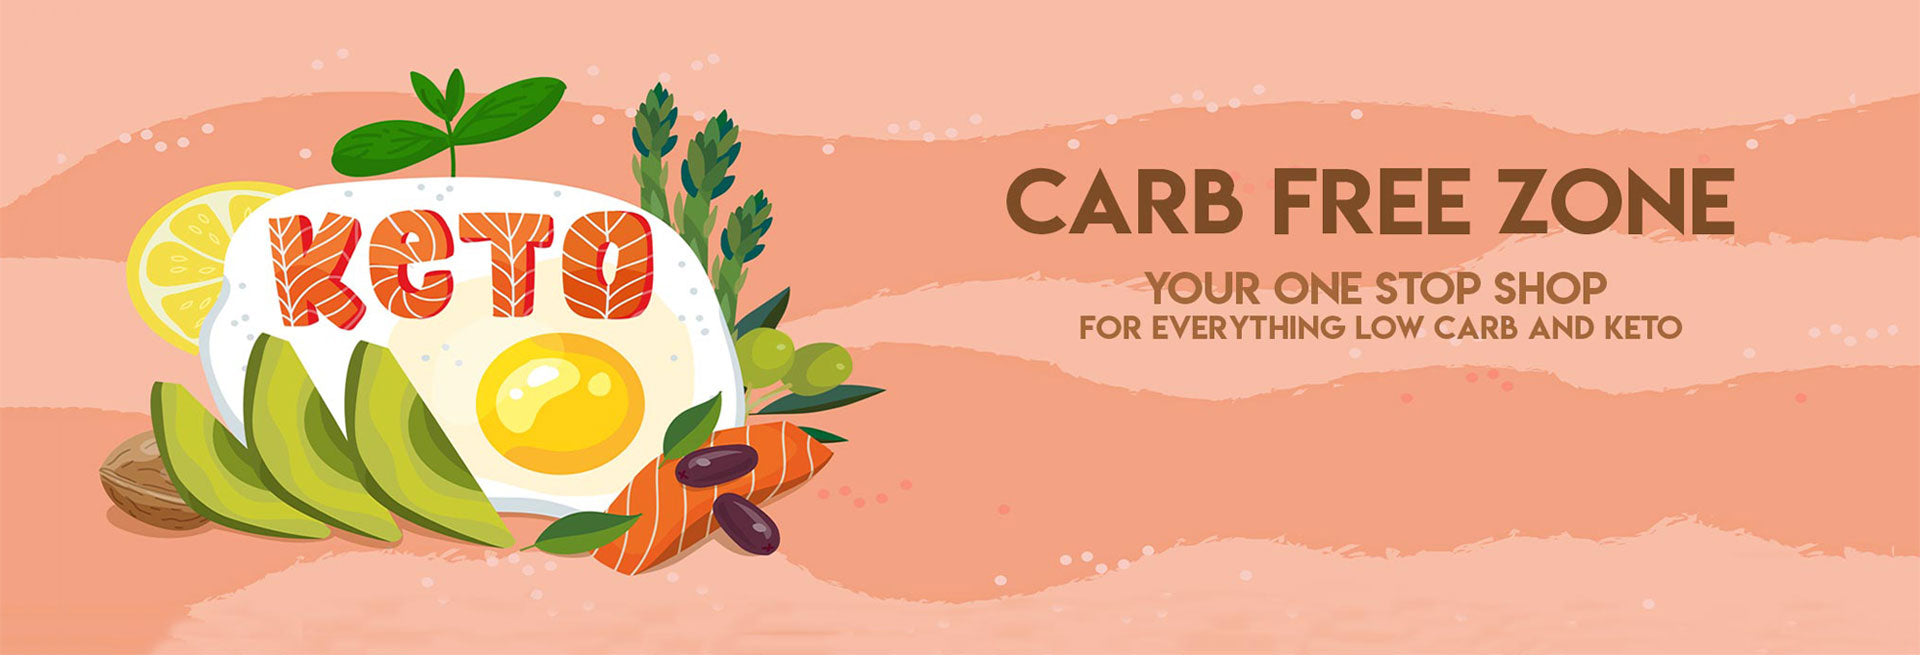 The carb free zone offers products and guides for a range of diets from Low Carb, Paleteo, Low sugar and the Ketogenic Diet